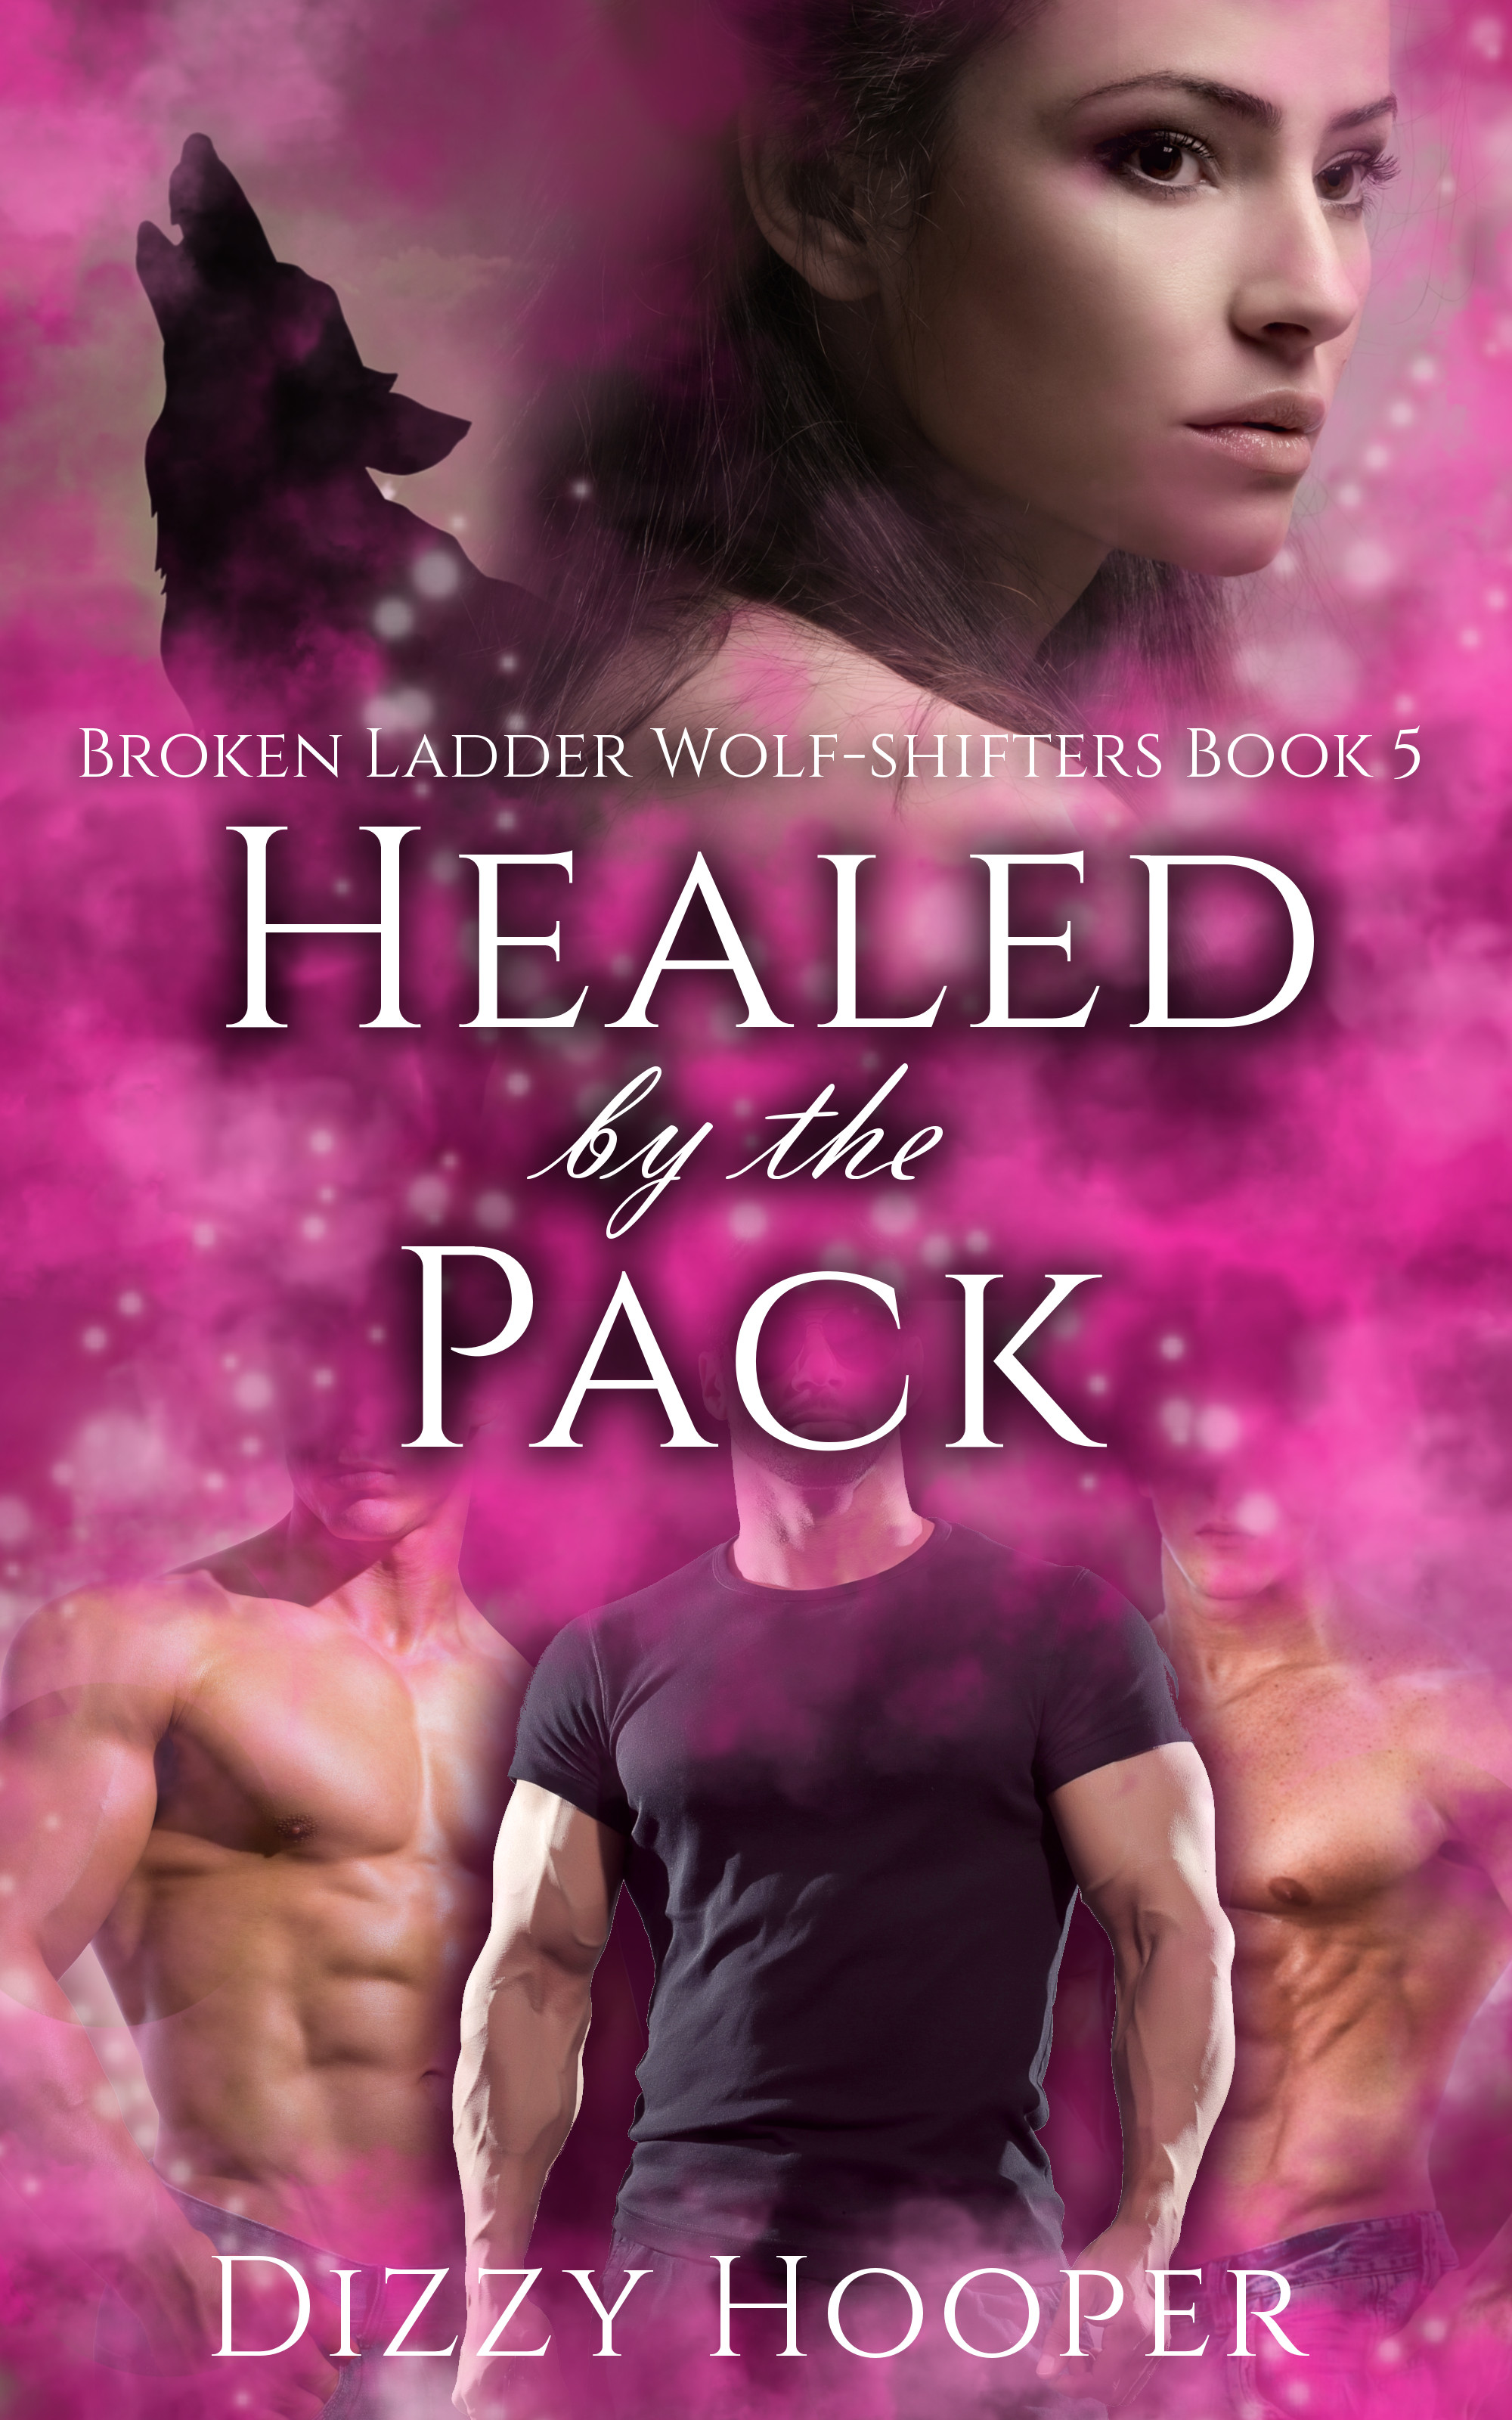 Healed By The Pack is here!!!